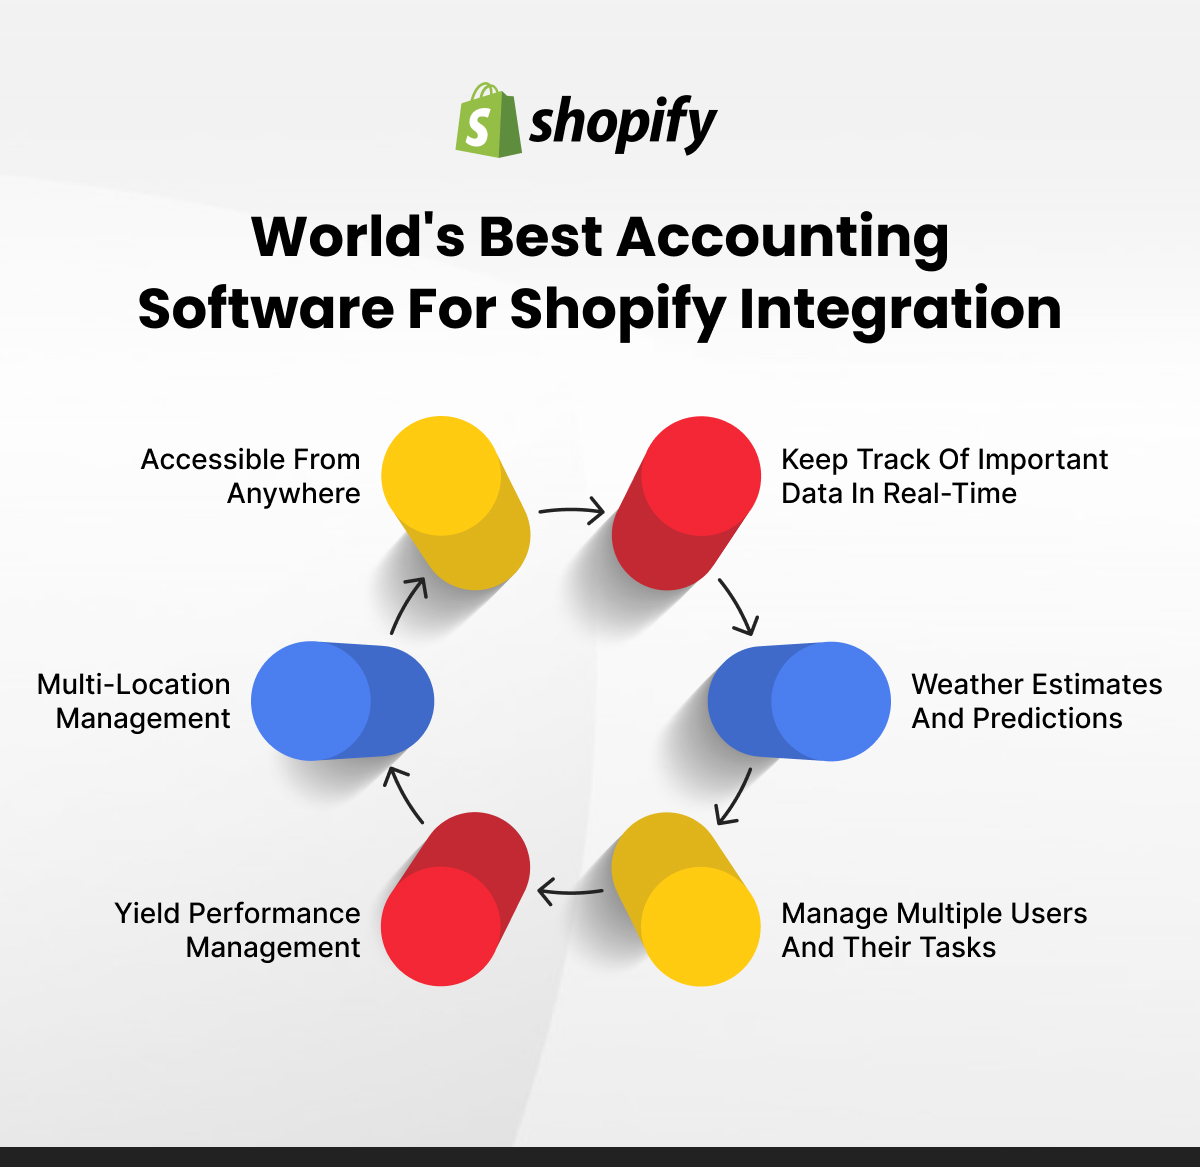 World's Best Accounting Software For Shopify Integration